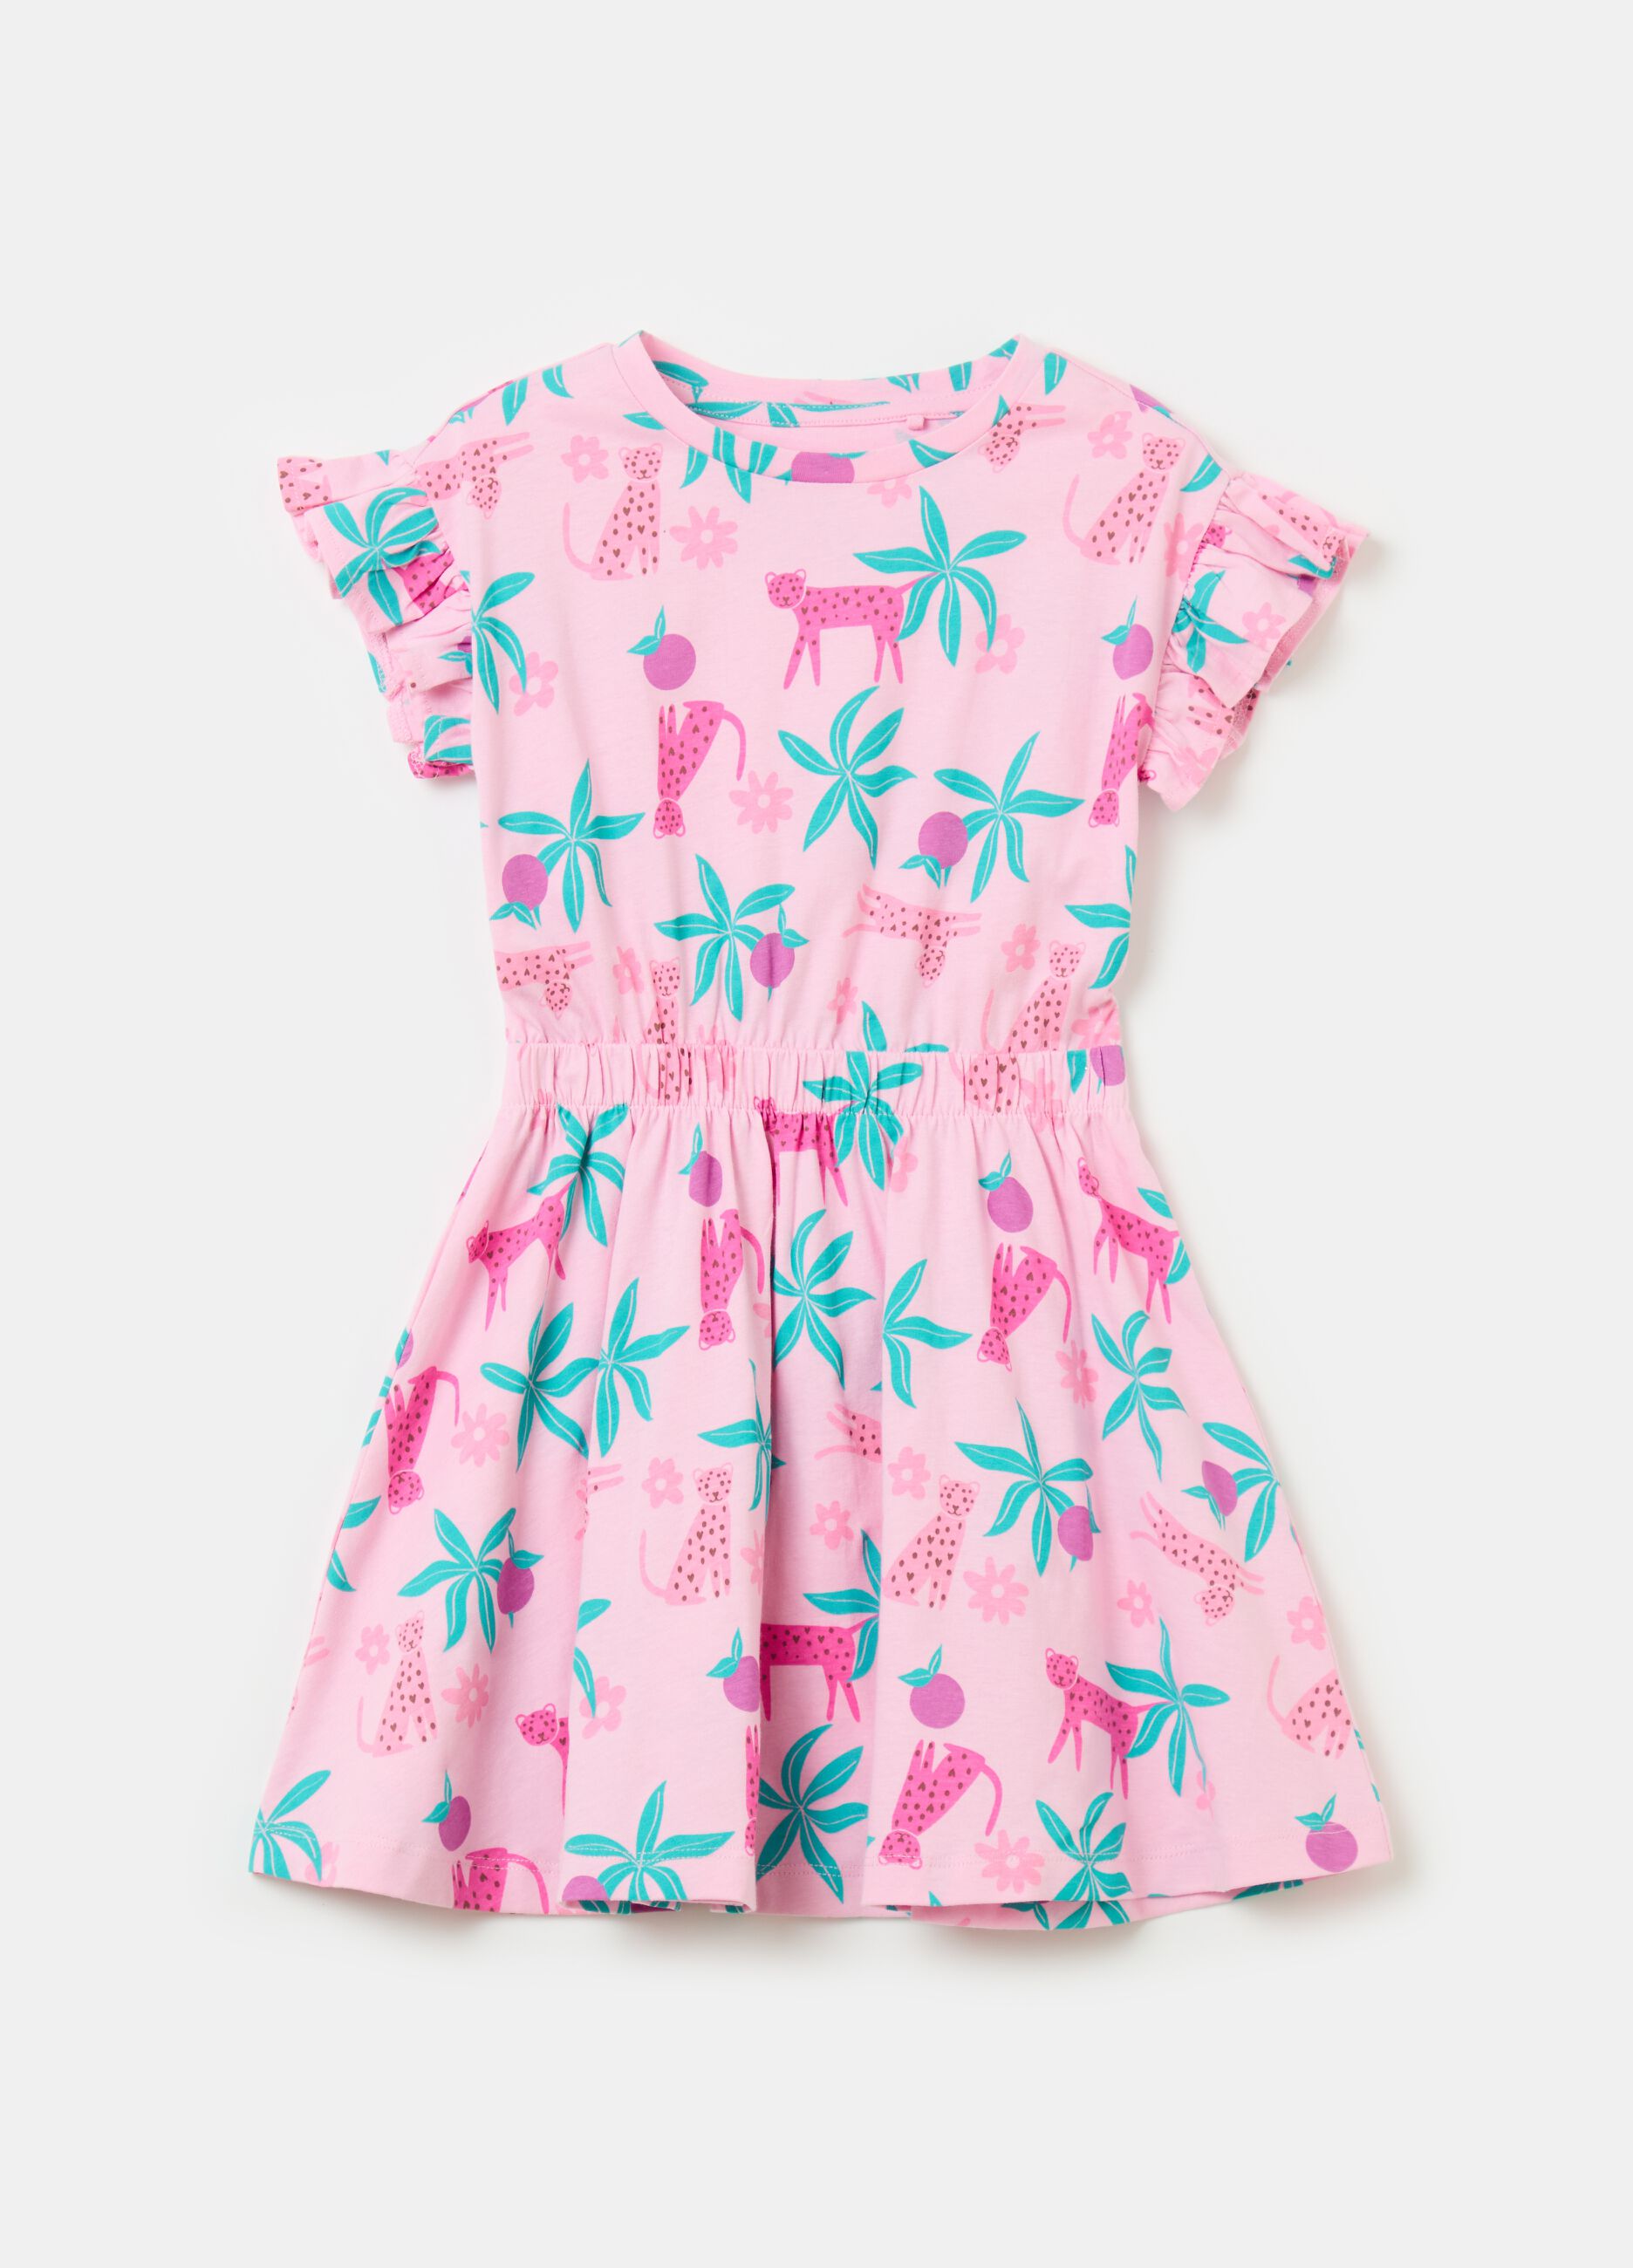 Cotton dress with frills and print